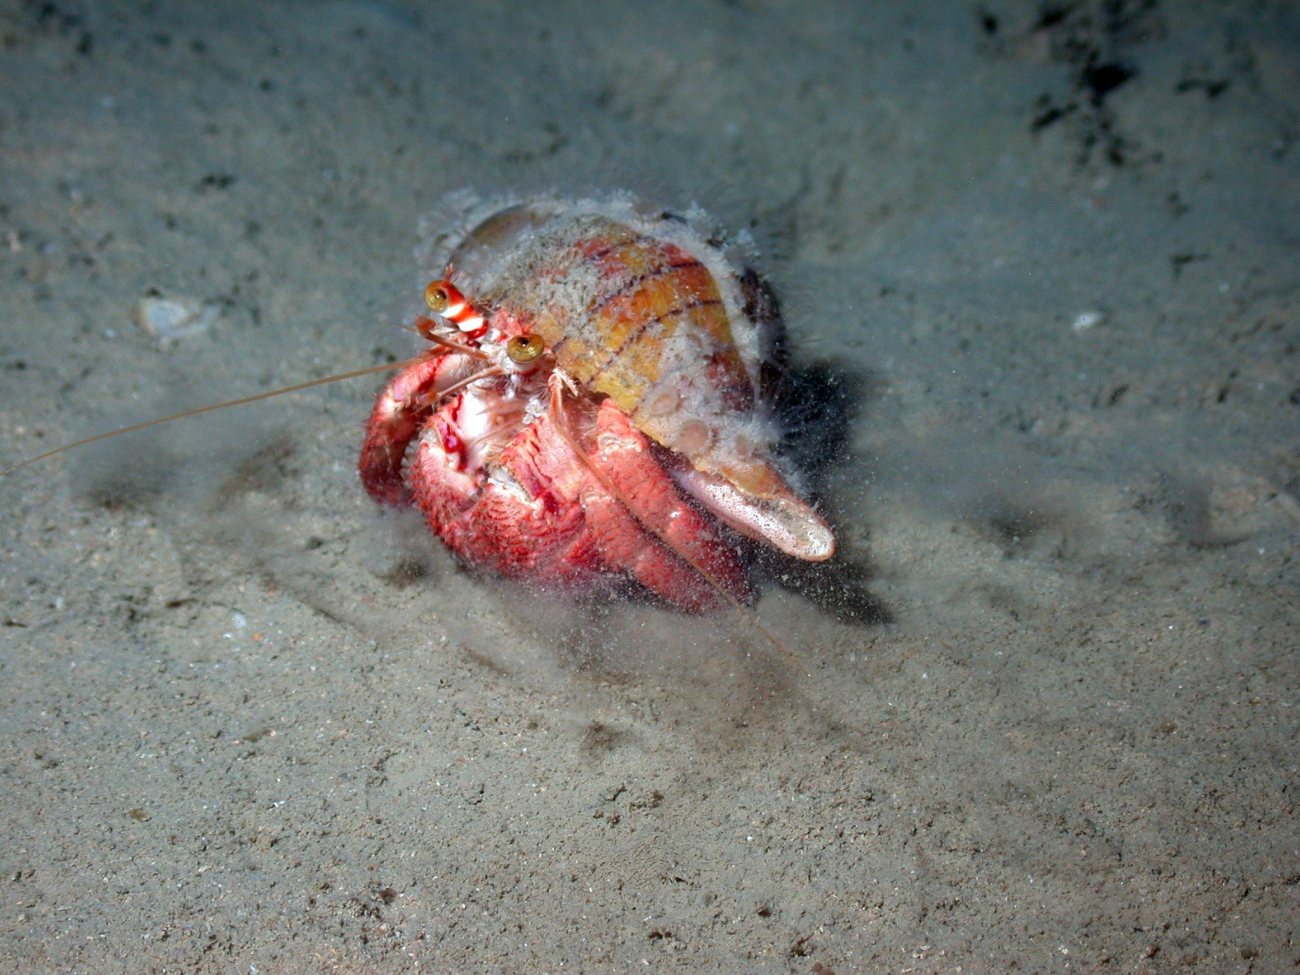 This hermit crab (Paguristes hernancortezi) was found scuttling across the seafloor in deeper areas of Flower Garden Banks NMS